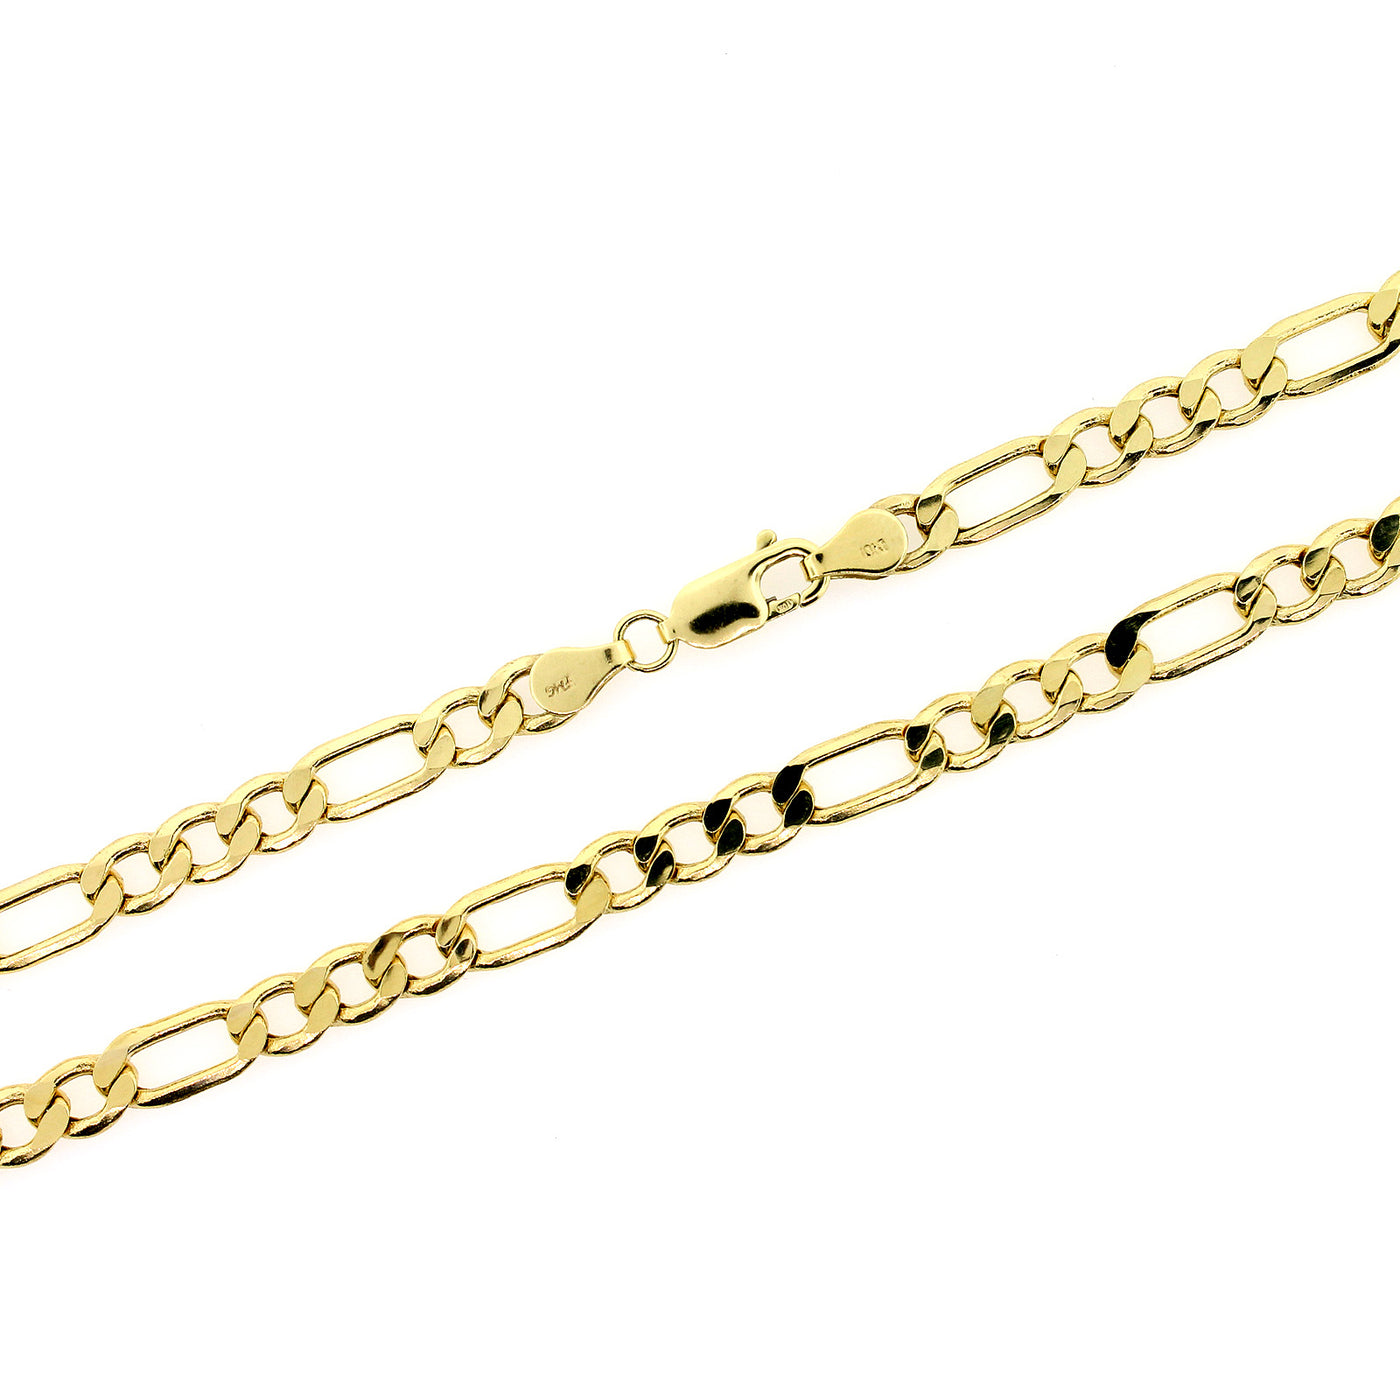 10K Solid Yellow Gold Men's Figaro Link Chain Necklace 5.5MM 18" 20" 22" 24" 26"